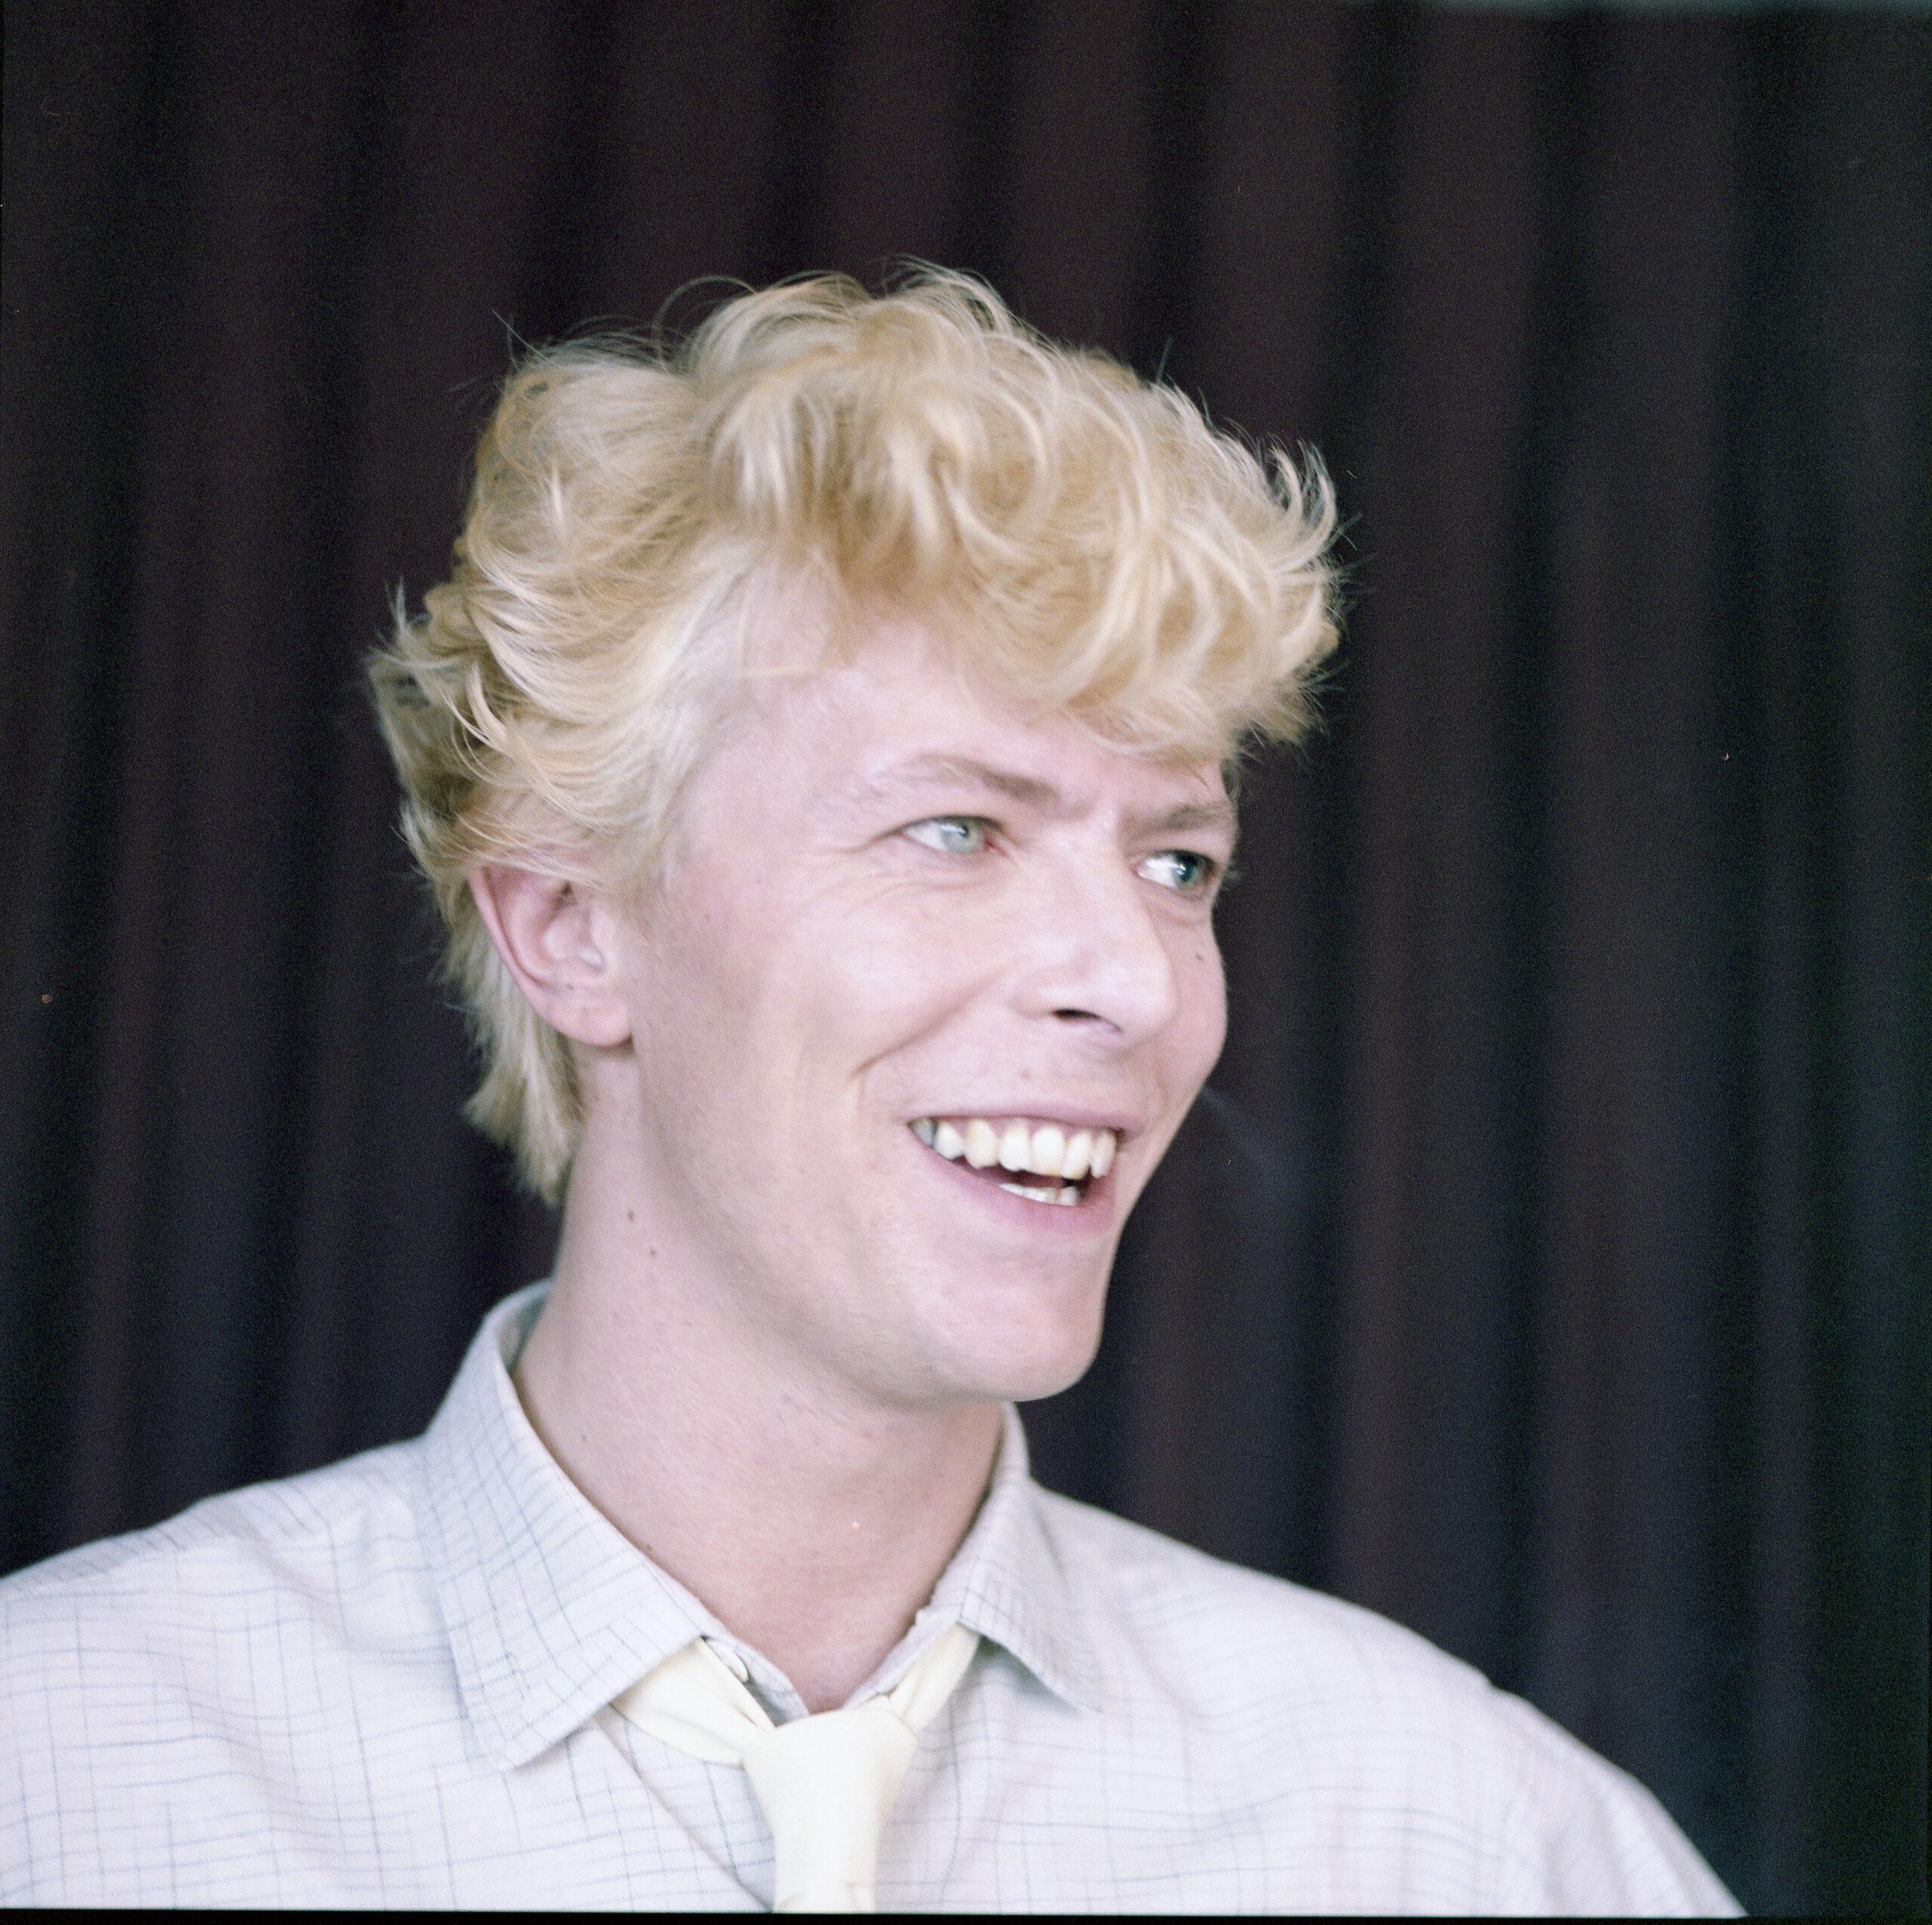 Never-before-seen photos of David Bowie while sitting for his 1983 wax figure released by Madame Tussauds London